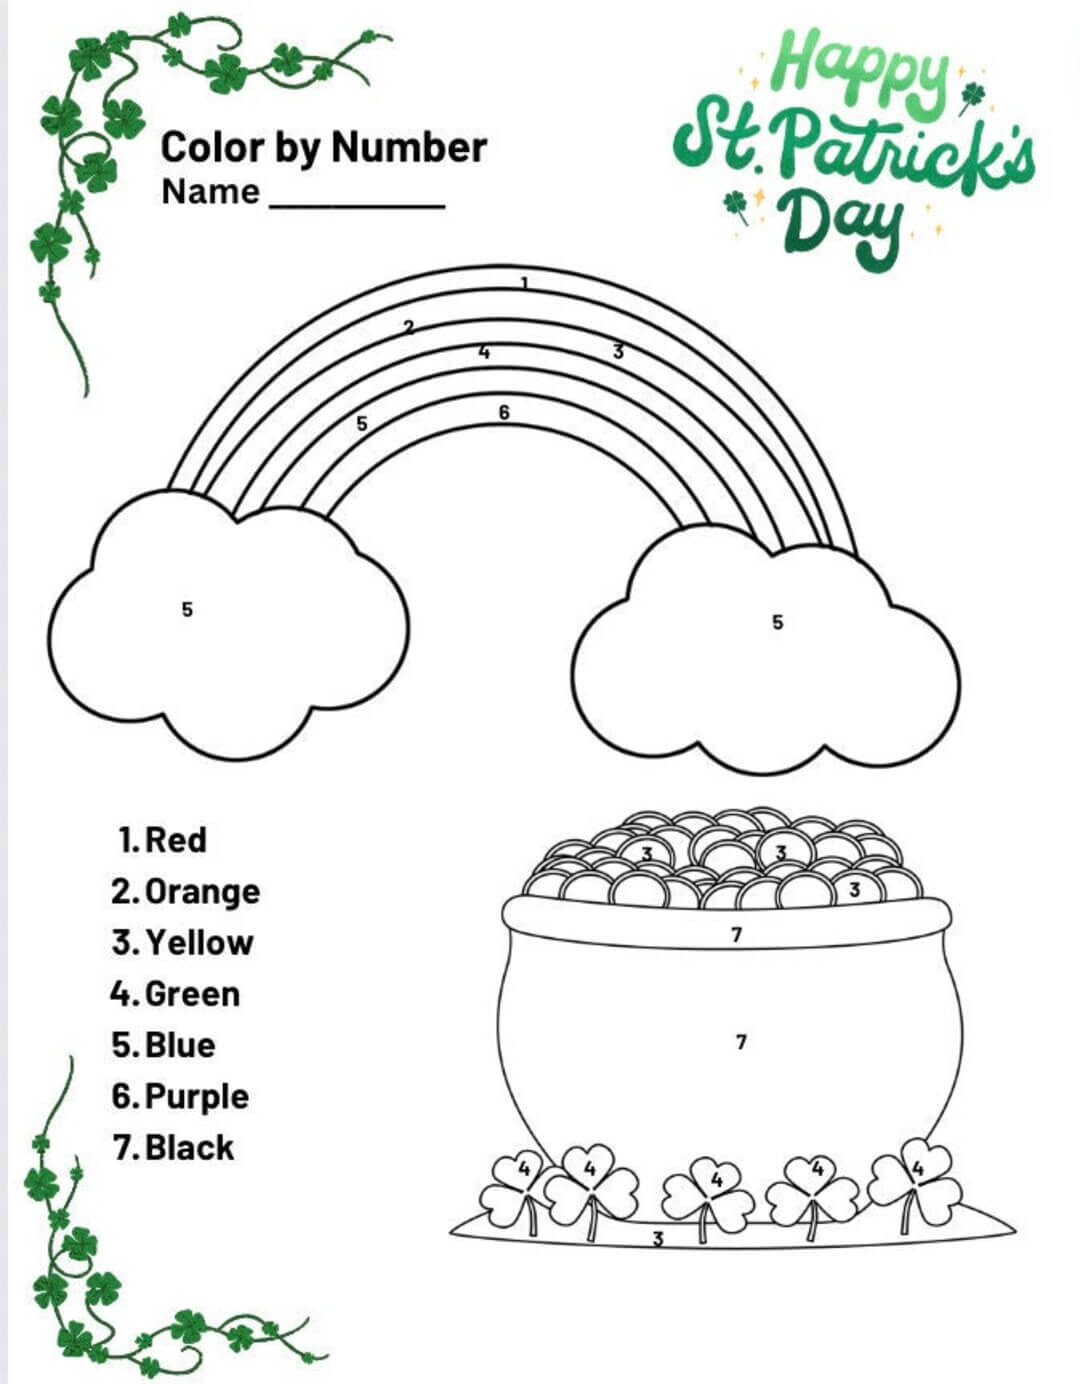 St Patricks Day Free Design Color by Number Color By Number